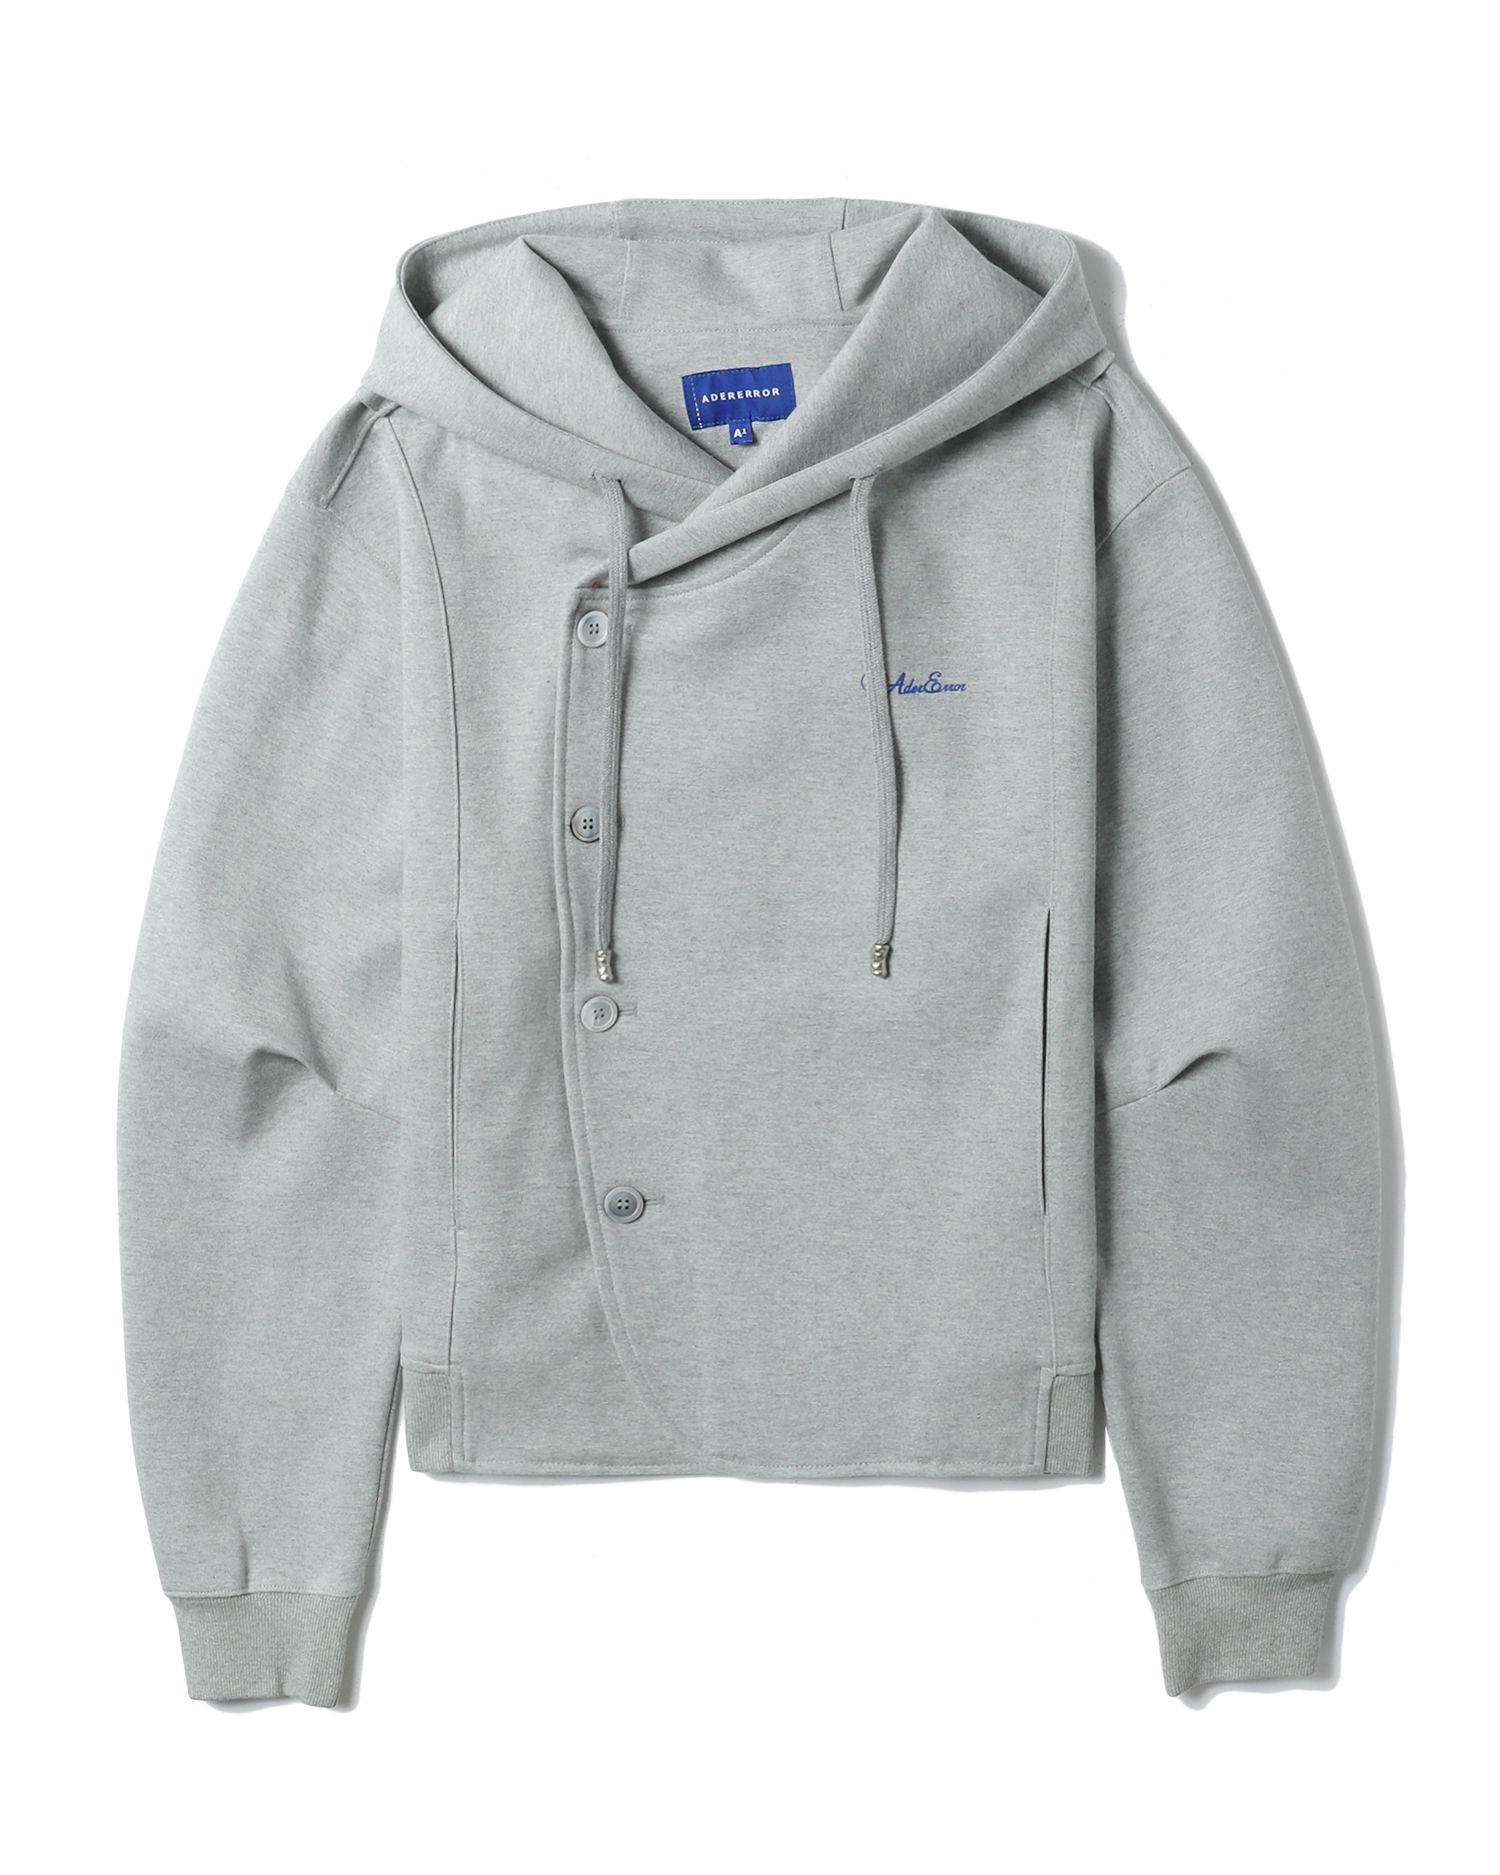 Fluic logo hoodie by ADER ERROR